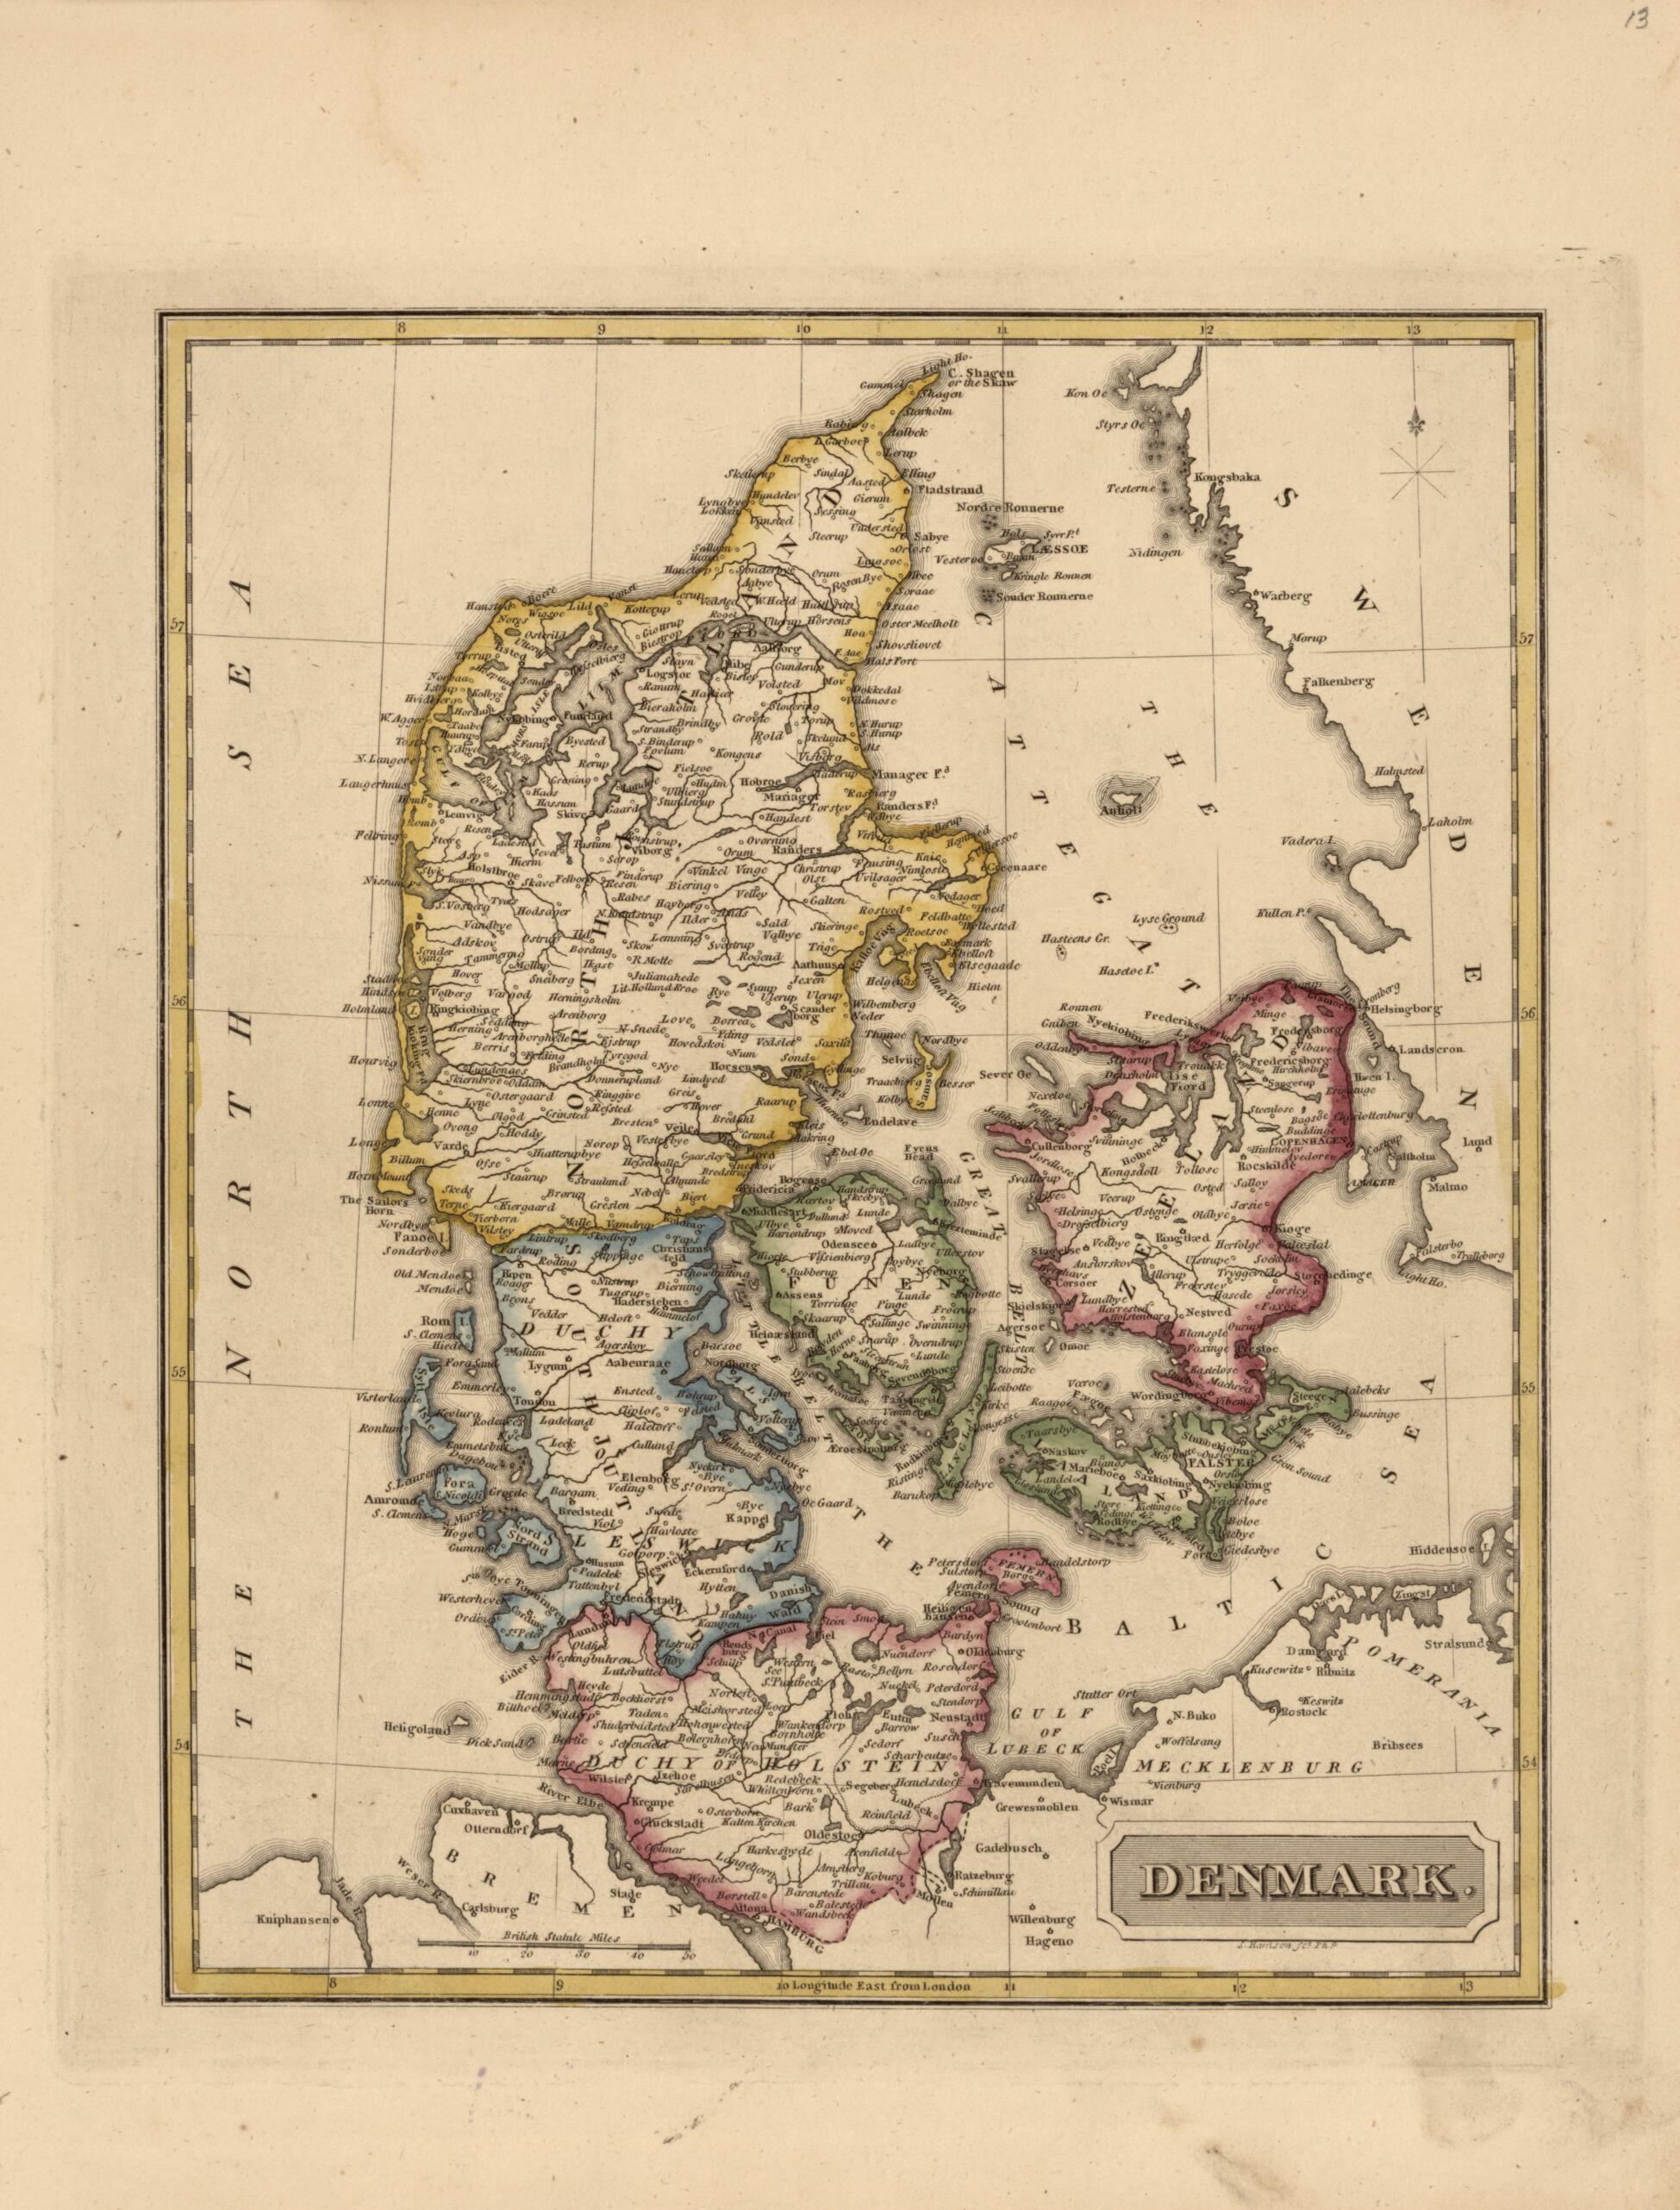 This old map of Denmark from a New and Elegant General Atlas, Containing Maps of Each of the United States. from 1817 was created by Henry Schenck Tanner in 1817